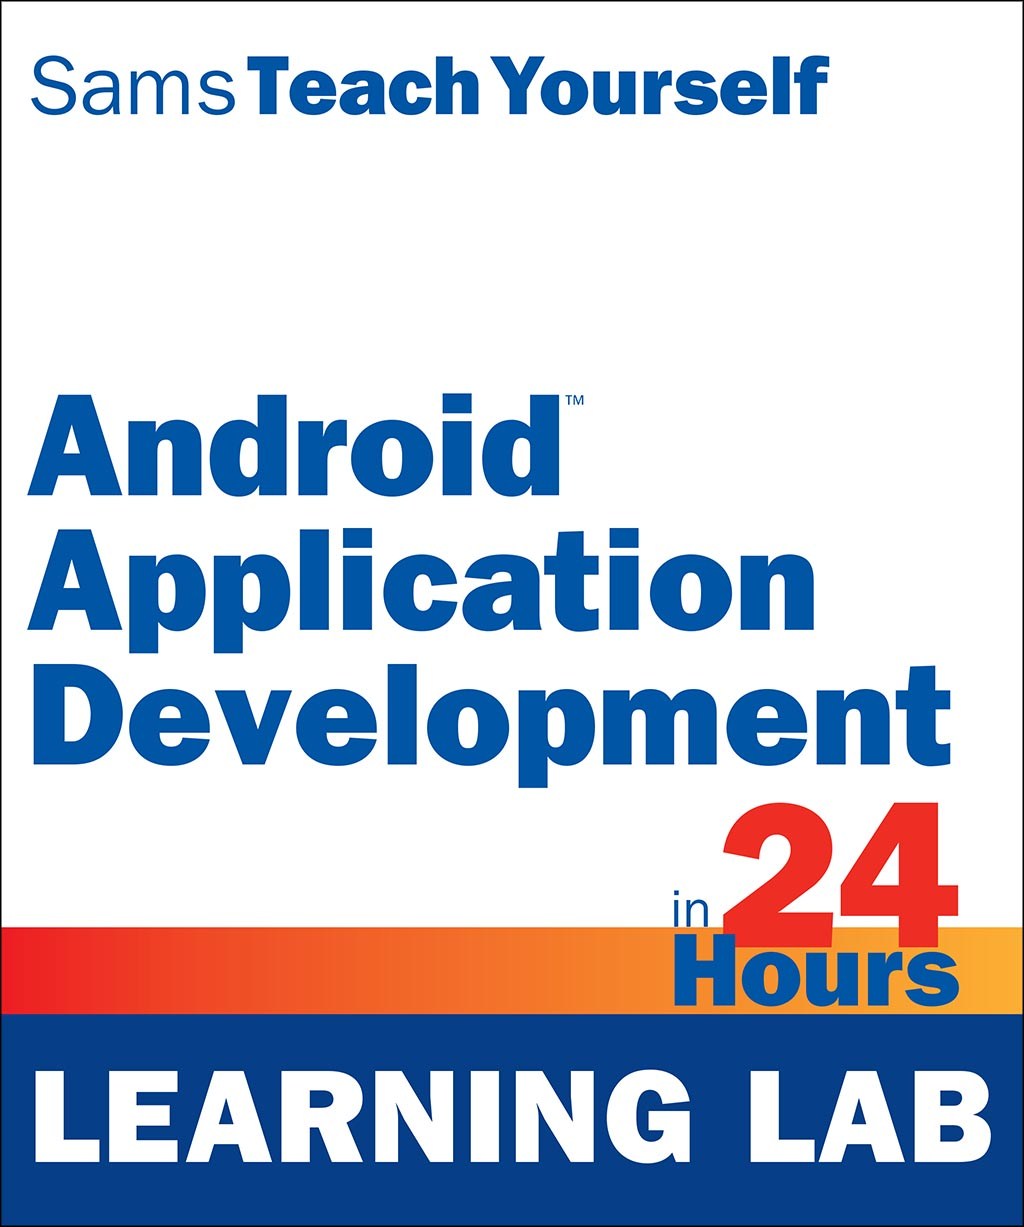 Android Application Development in 24 Hours, Sams Teach Yourself (Learning Lab), 4th Edition